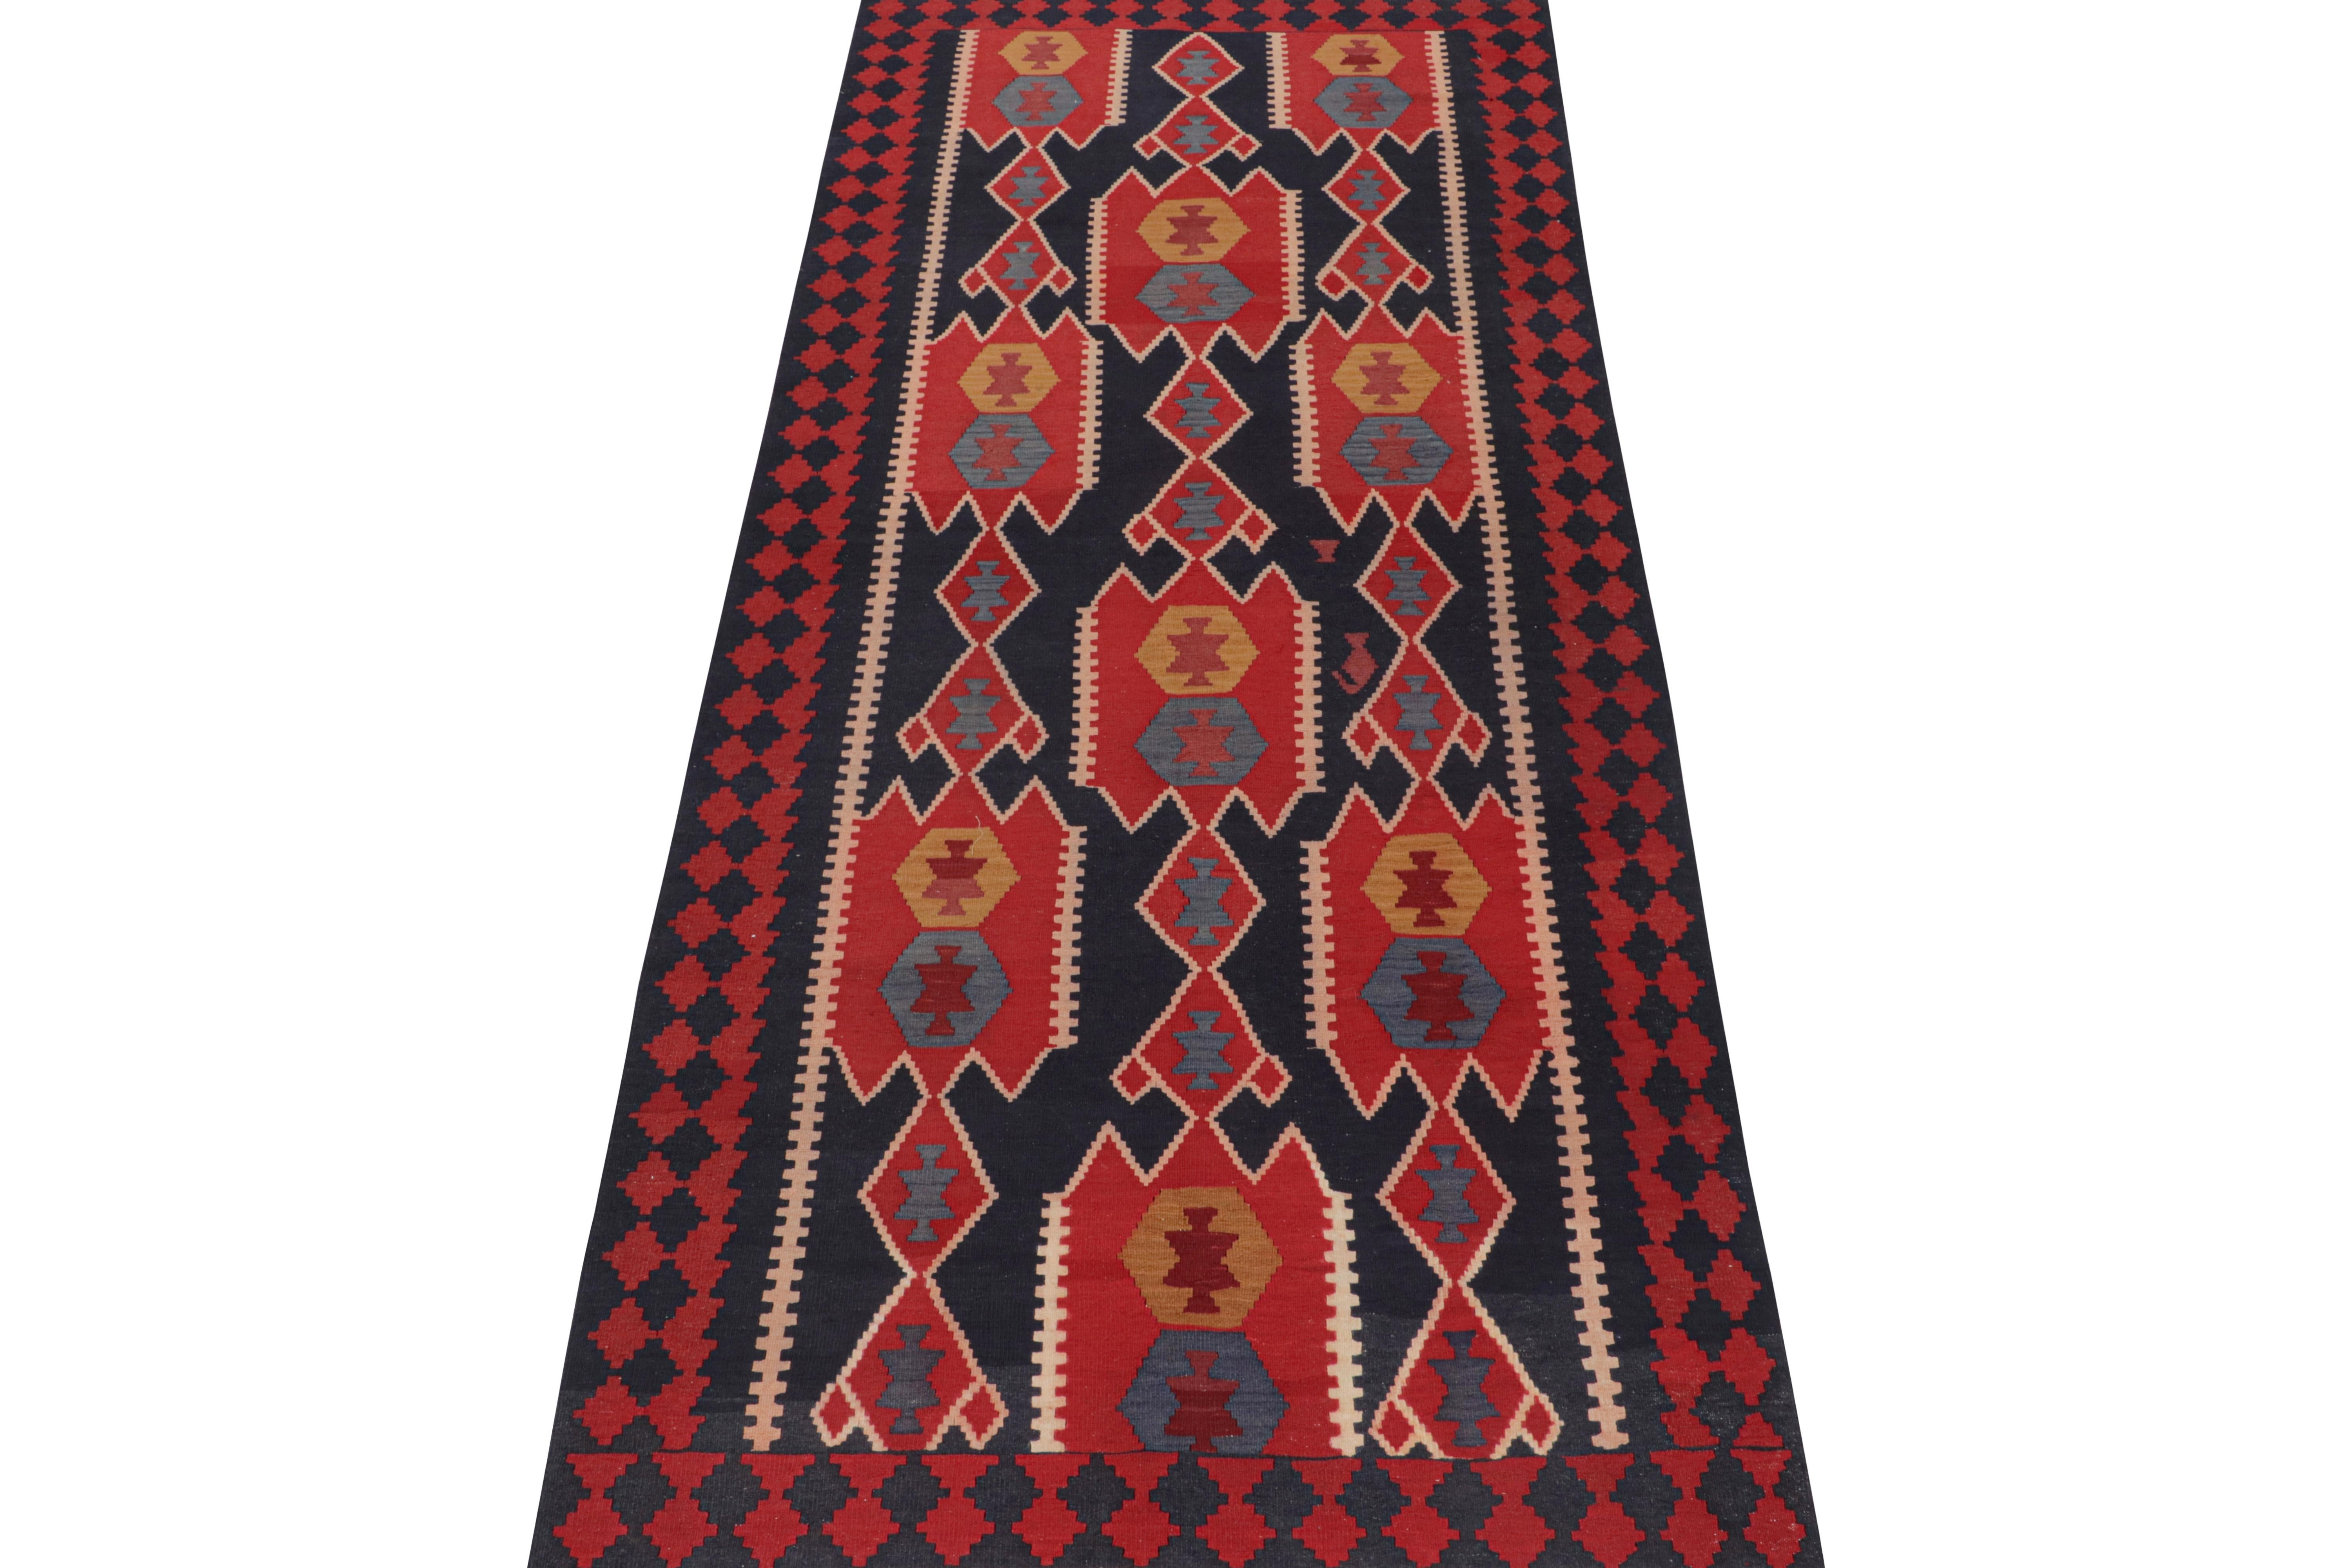 This vintage 4x11 Persian Kilim is a tribal rug from Meshkin—a small Northwest-Iranian village known for its fabulous works. Handwoven in wool, it originates circa 1950-1960. 

On the Design:

Its design favors traditional geometric patterns,